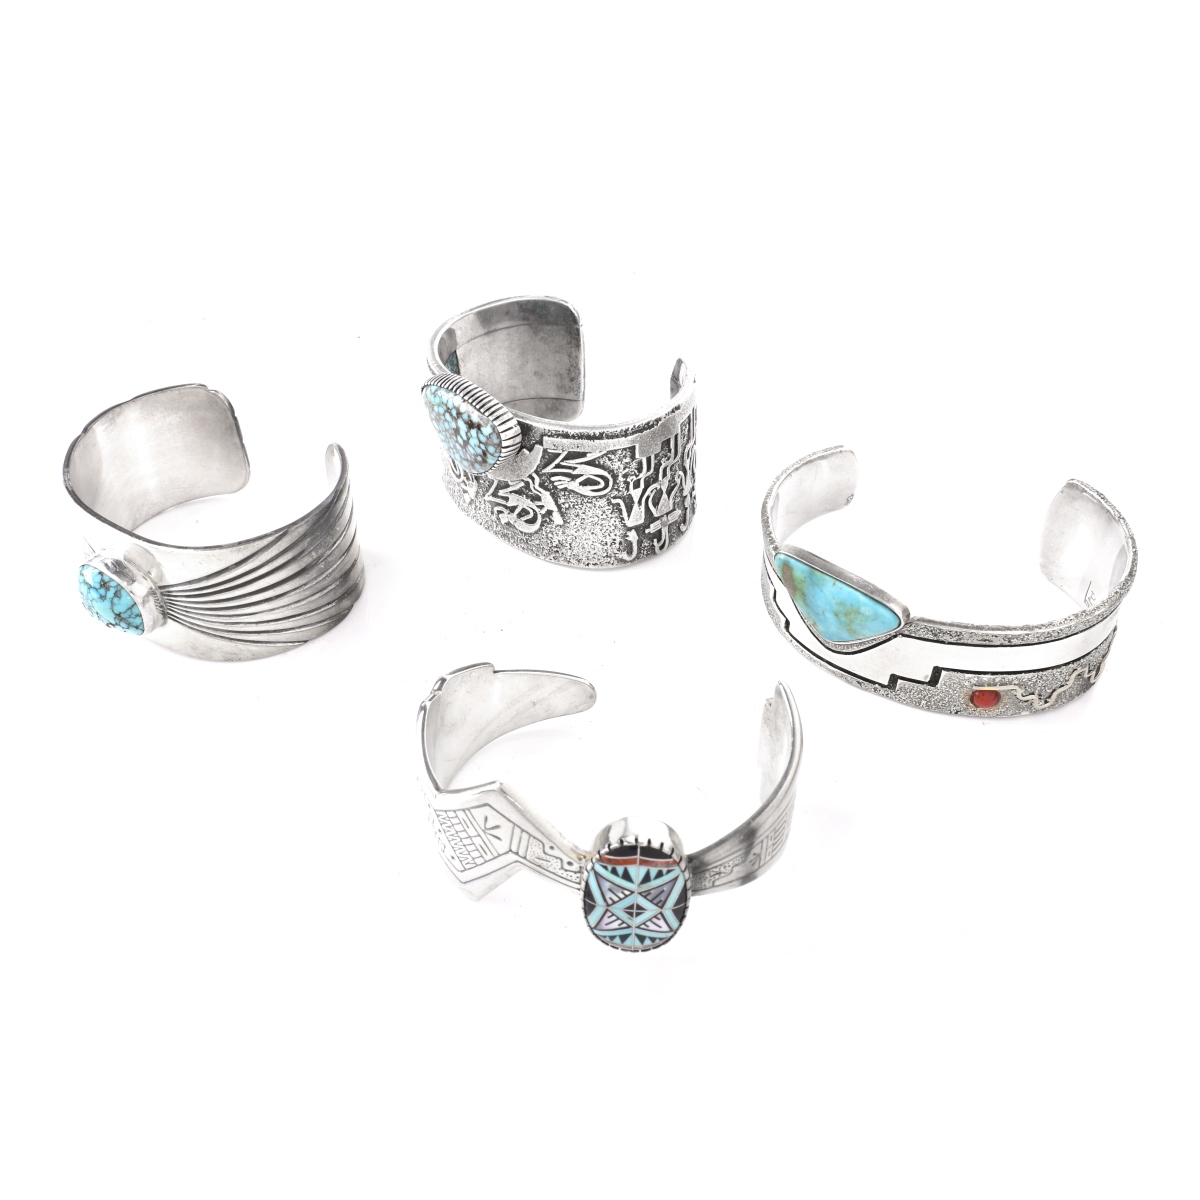 Four (4) Silver and Turquoise Bracelets